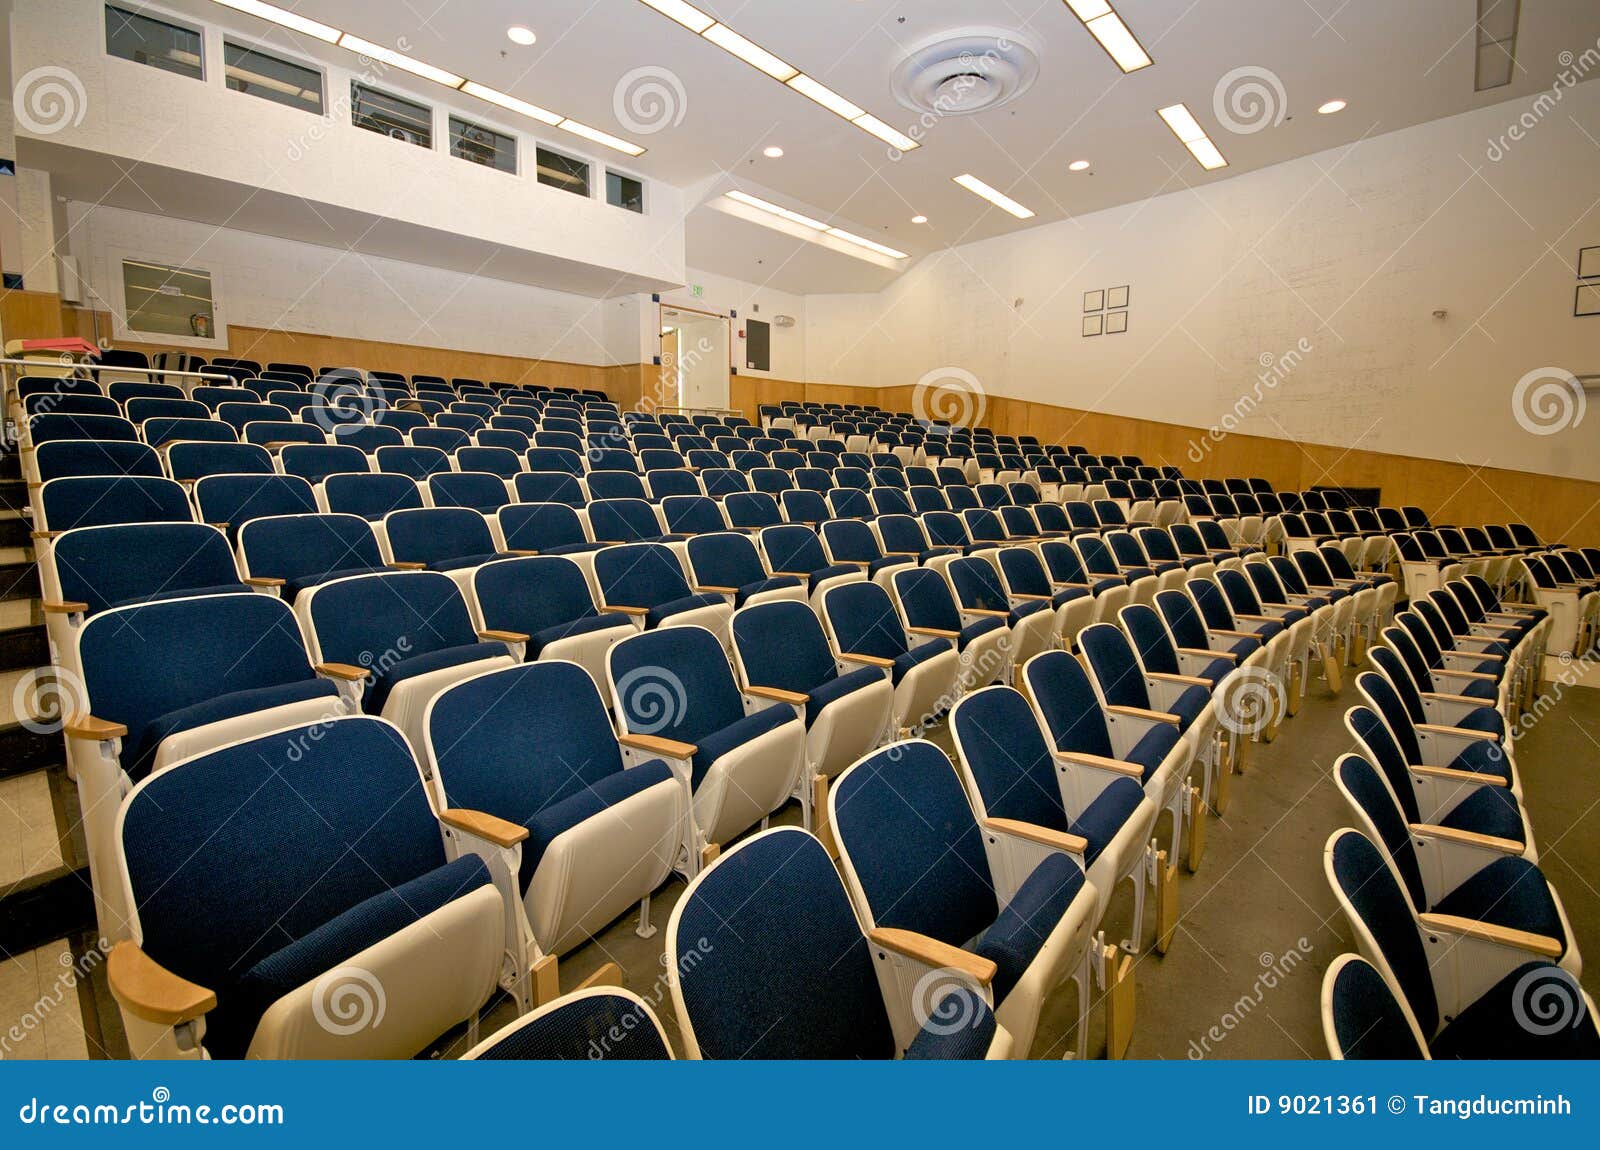 empty lecture hall in college